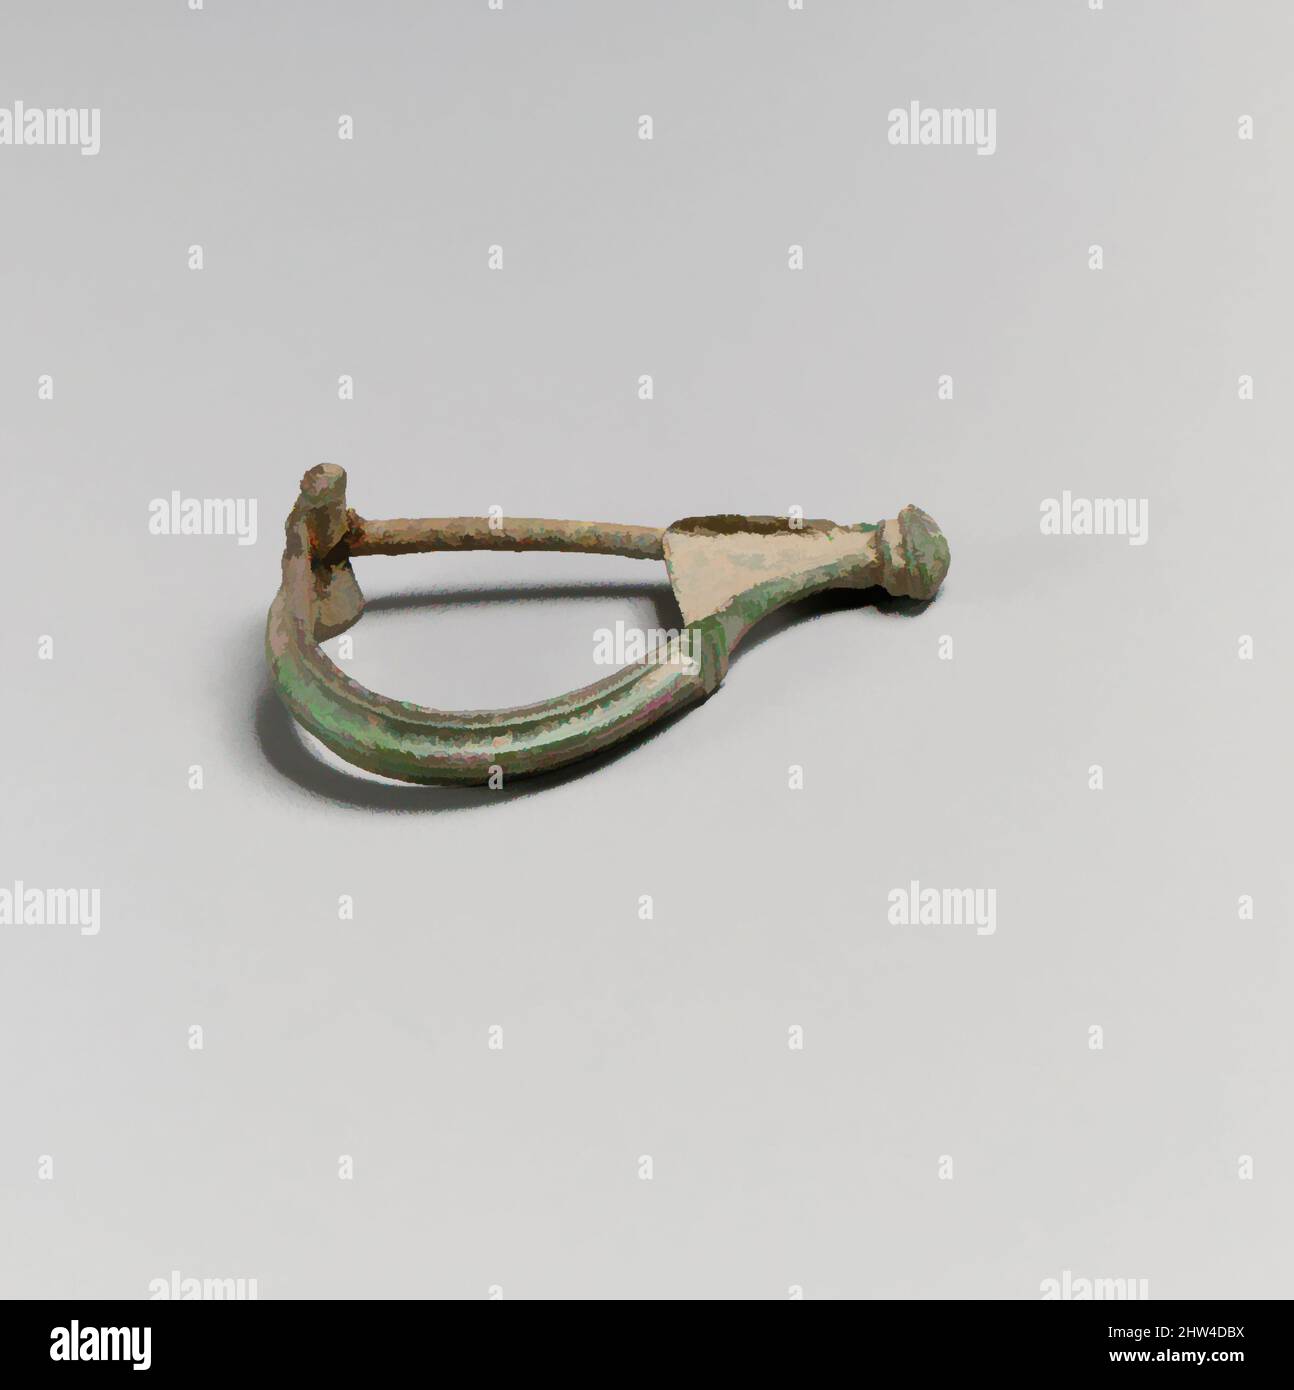 Art inspired by Fibula, Aucissa type, late 1st century B.C.–mid-1st century A.D., Roman, Bronze and iron, Other: 1 7/8 in. (4.7 cm), Bronzes, Classic works modernized by Artotop with a splash of modernity. Shapes, color and value, eye-catching visual impact on art. Emotions through freedom of artworks in a contemporary way. A timeless message pursuing a wildly creative new direction. Artists turning to the digital medium and creating the Artotop NFT Stock Photo